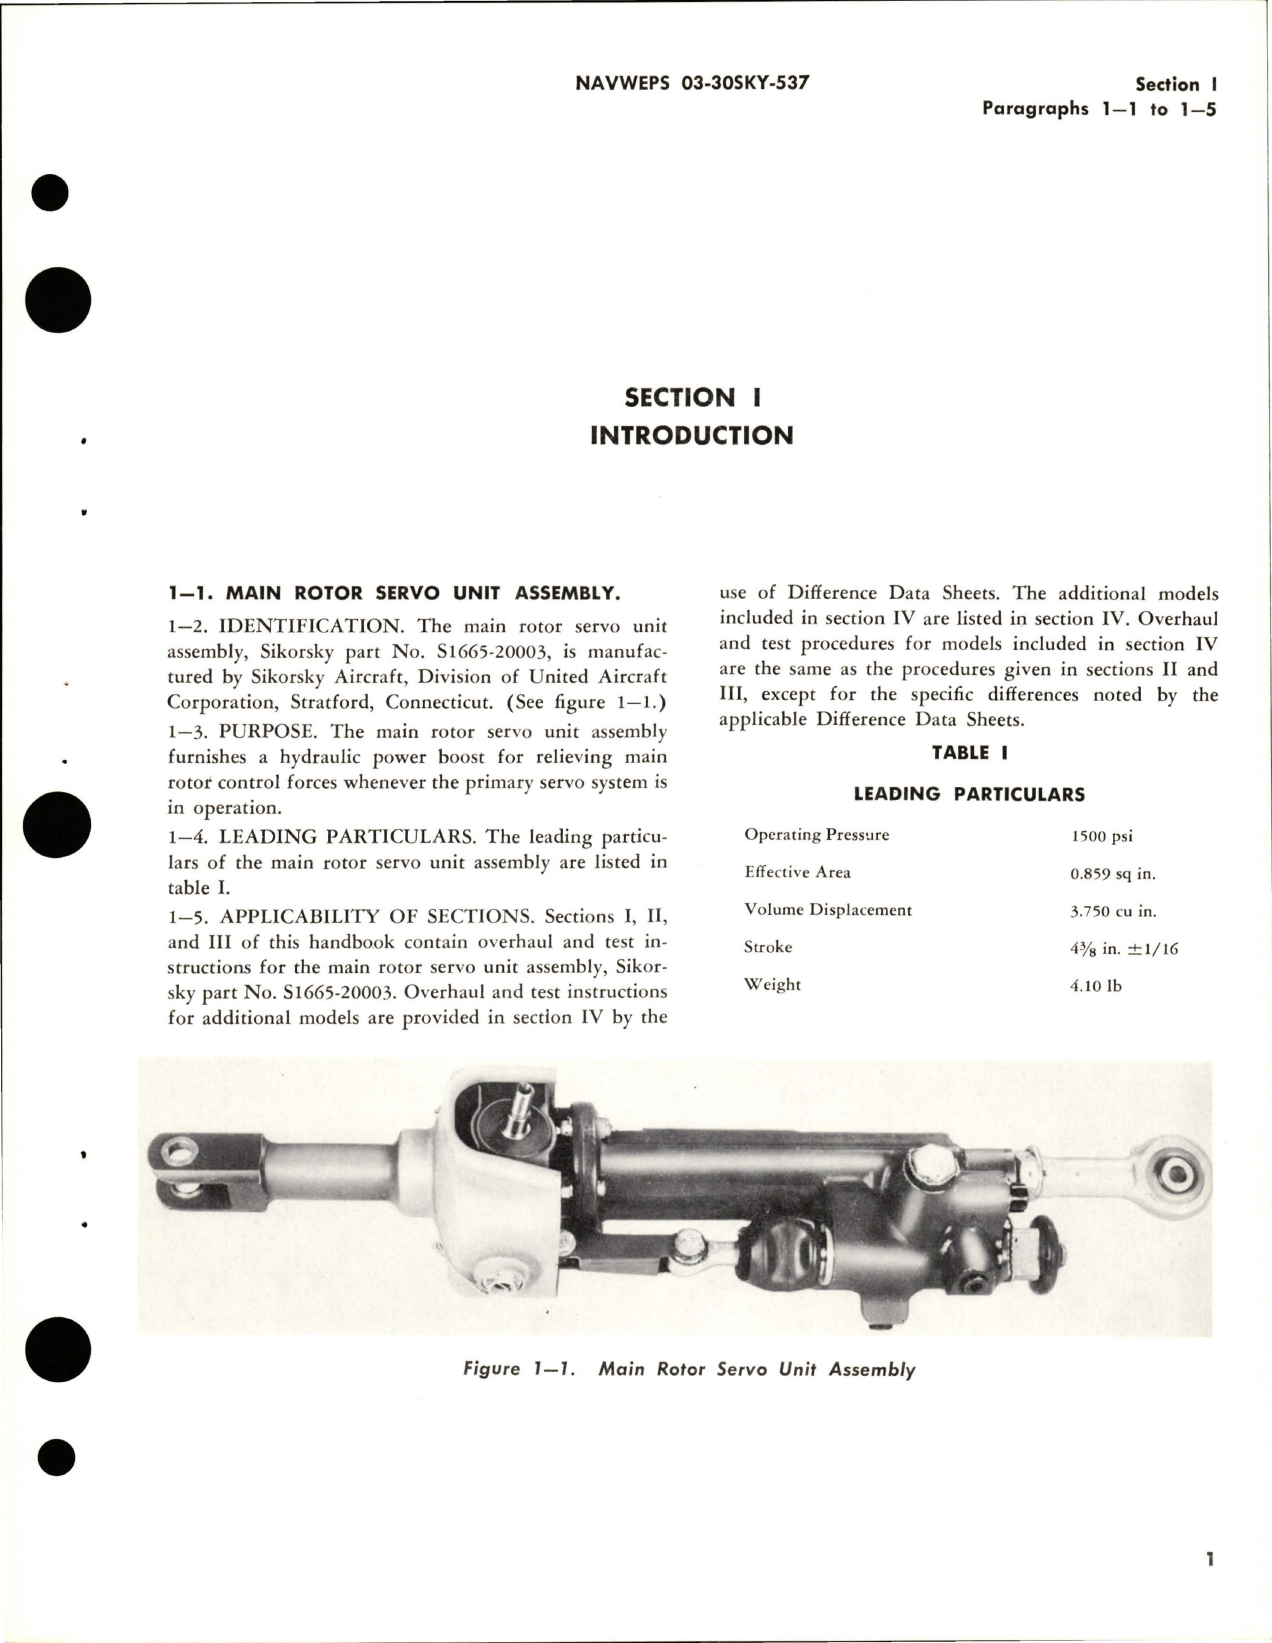 Sample page 5 from AirCorps Library document: Overhaul Instructions for Motor Rotor Servo Unit Assembly - Parts S1665-20003 and S1665-20003-1